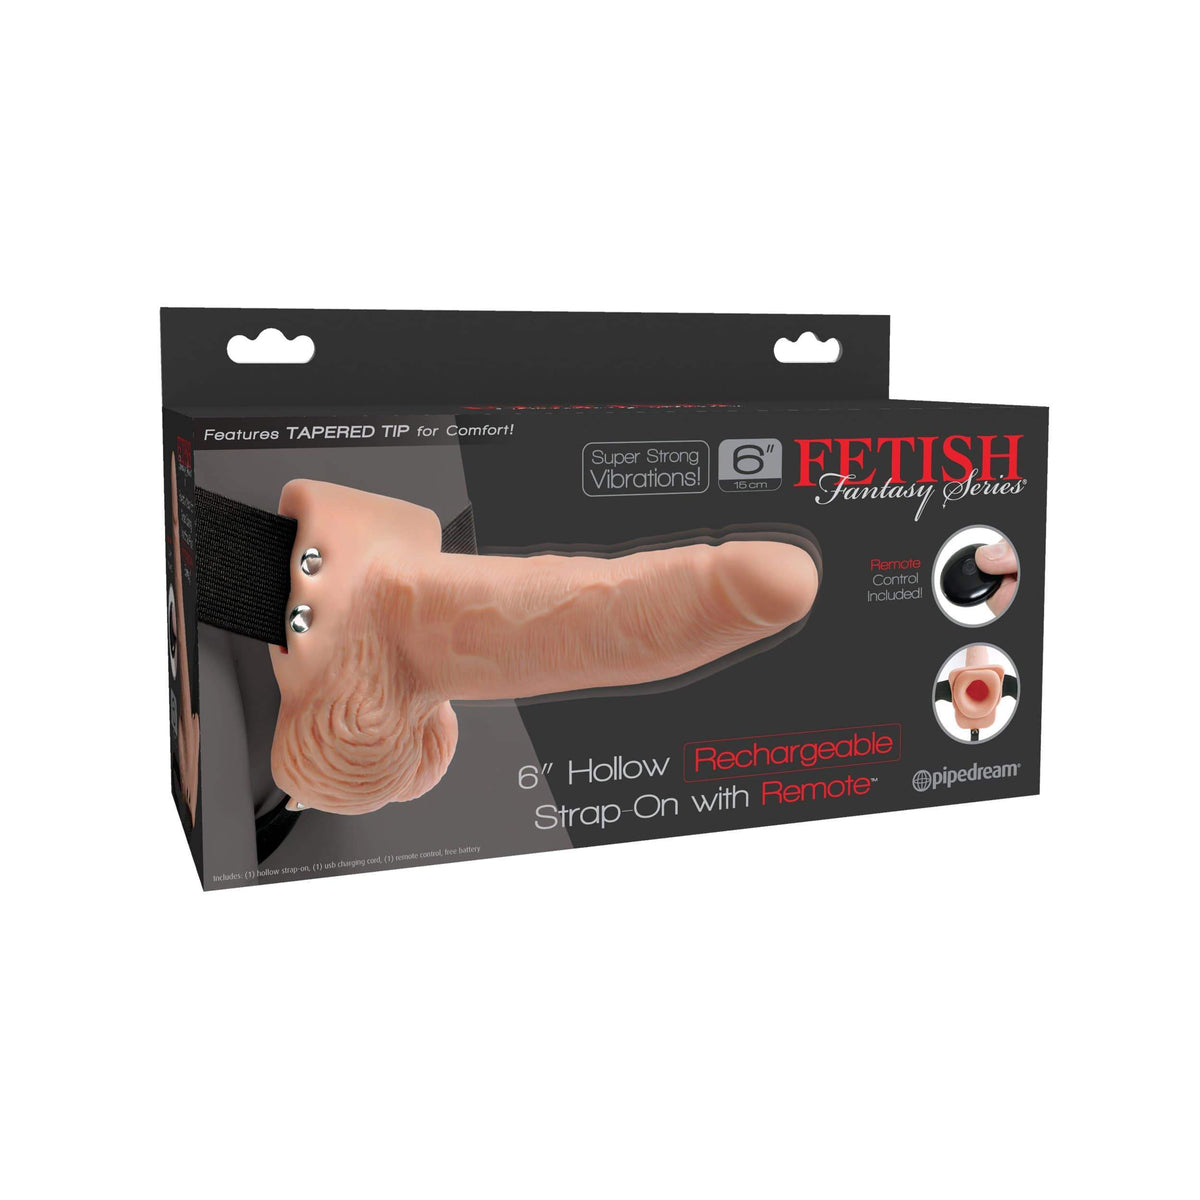 Pipedream - Fetish Fantasy Hollow Rechargeable Strap On Remote 6&quot; (Beige) Remote Control (Wireless) Strap On with Dildo for Reverse Insertion (Vibration) Rechargeable 603912759228 CherryAffairs